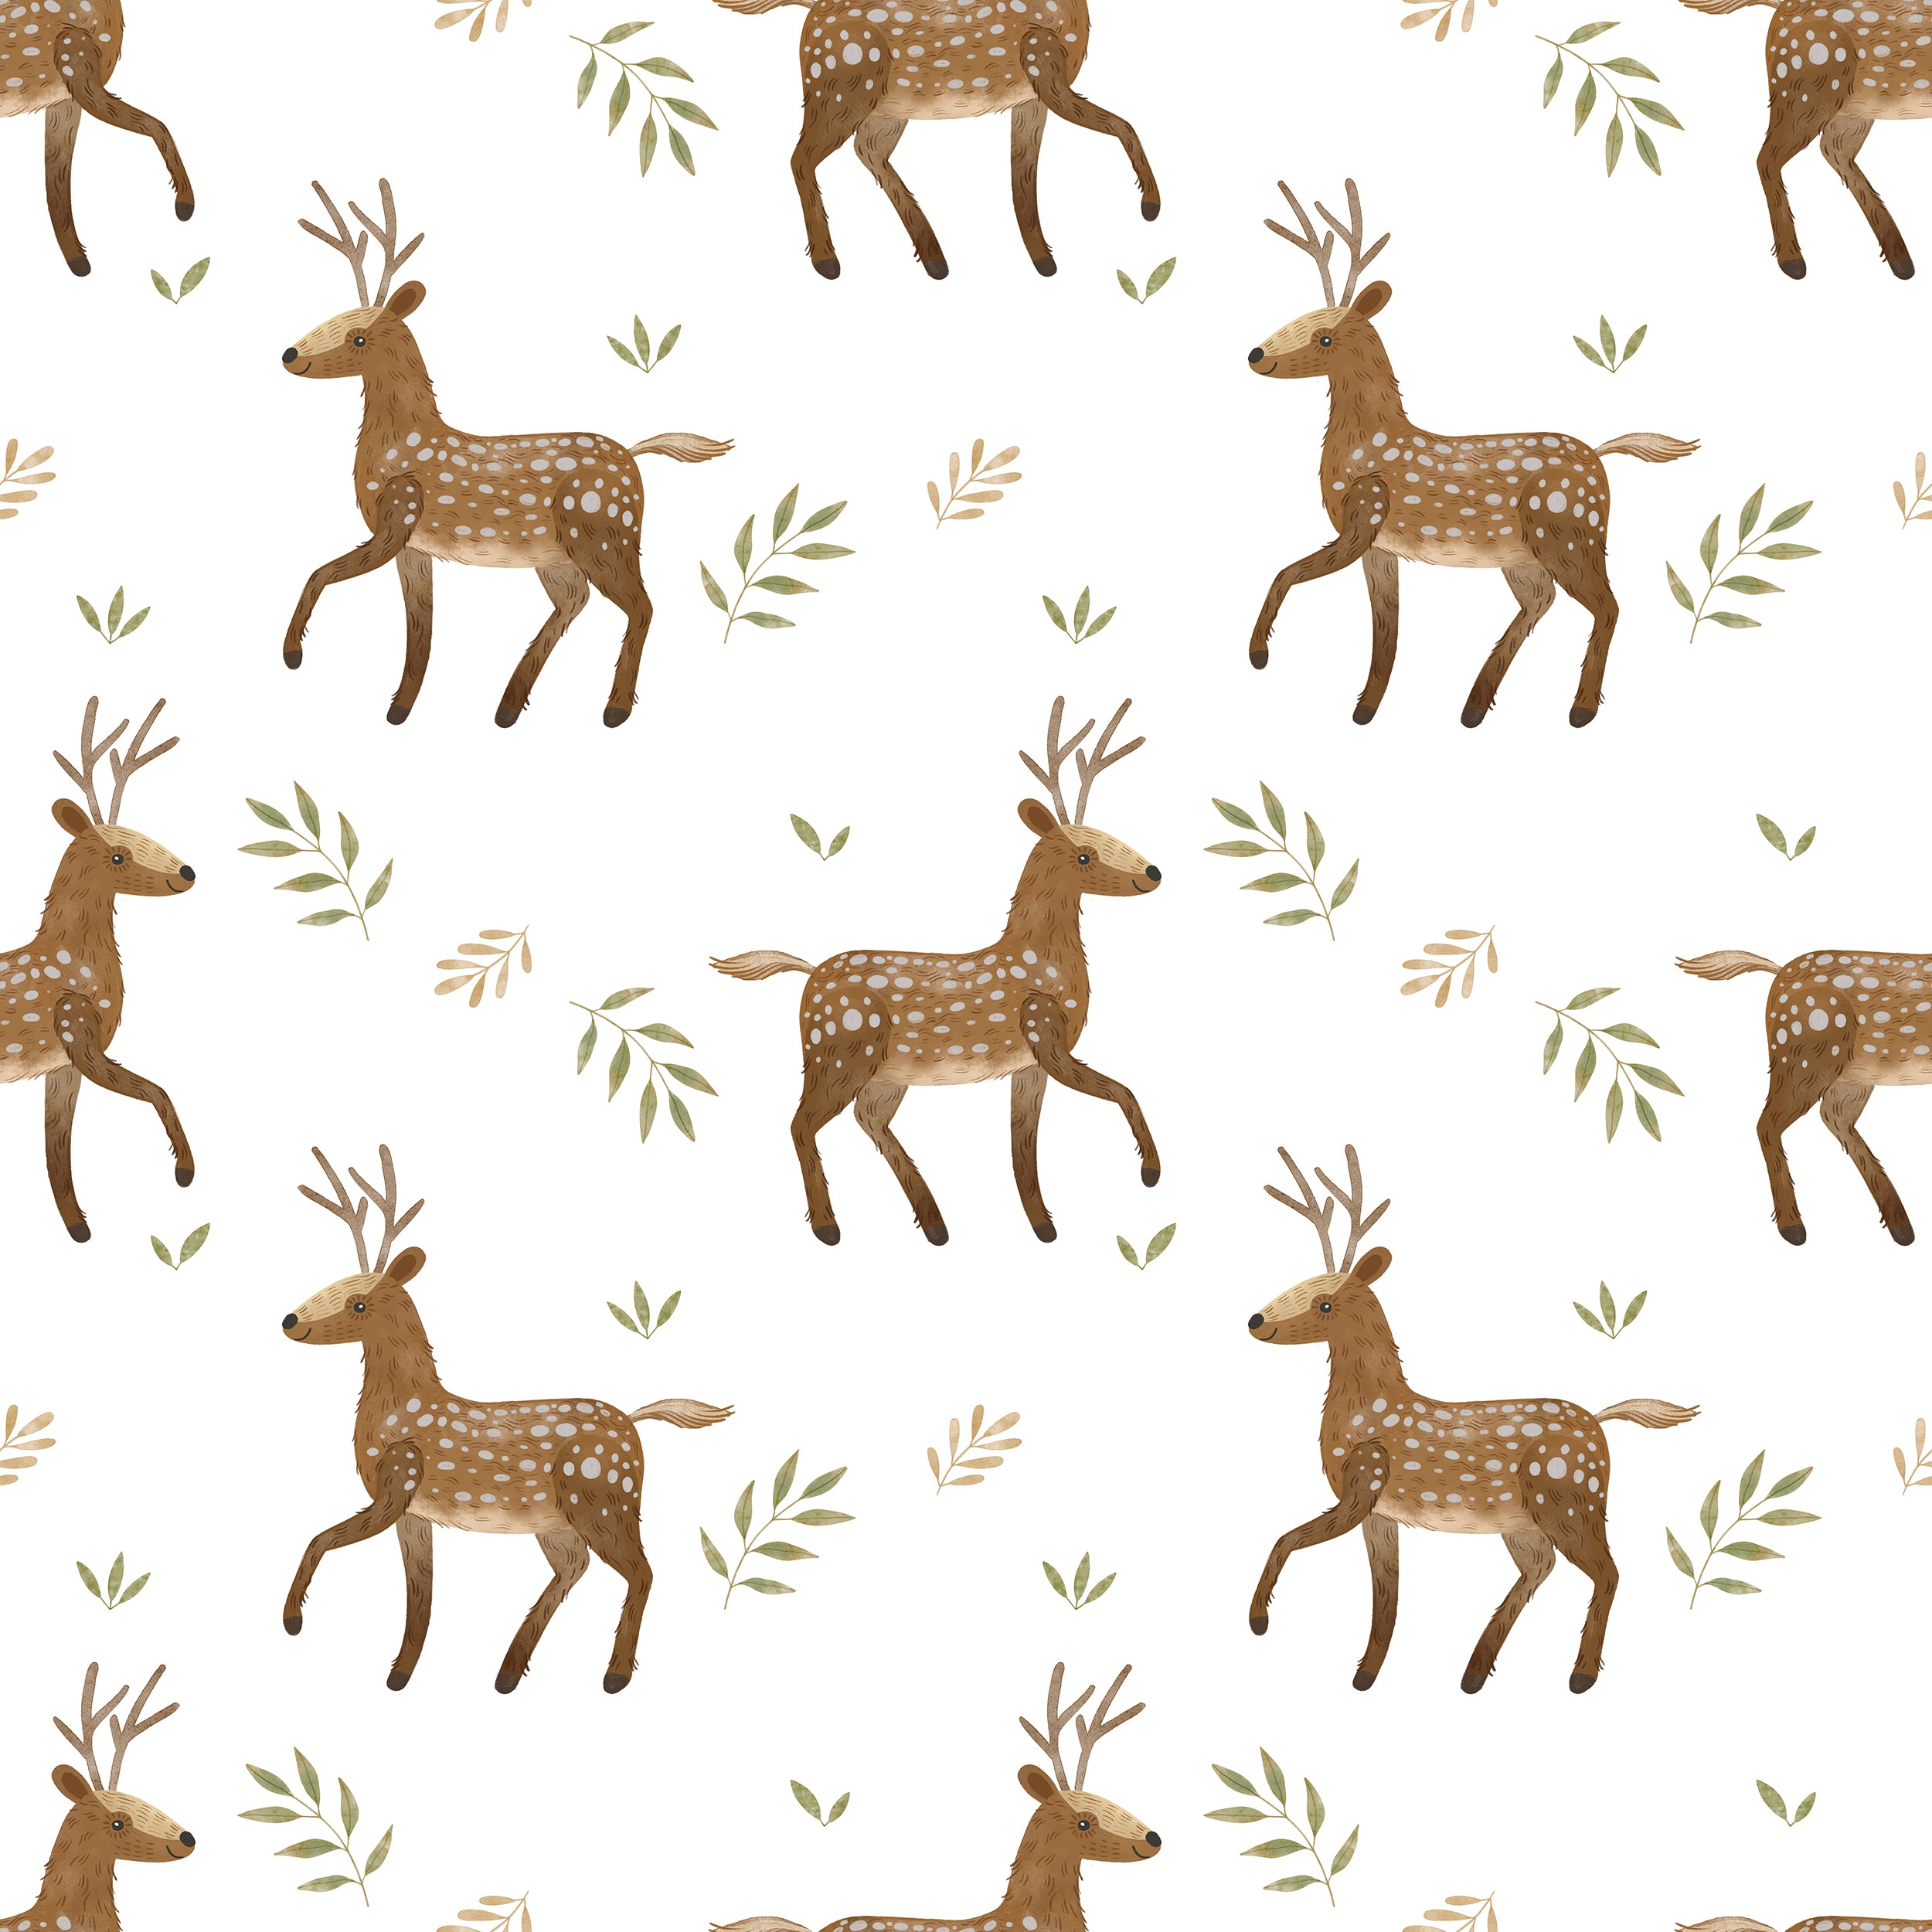 Close-up of Forest Stag Wallpaper depicting a repeating pattern of brown stags in various poses, surrounded by small green leaves on a white background, offering a vibrant and nature-inspired look ideal for creating a focal point in any room.